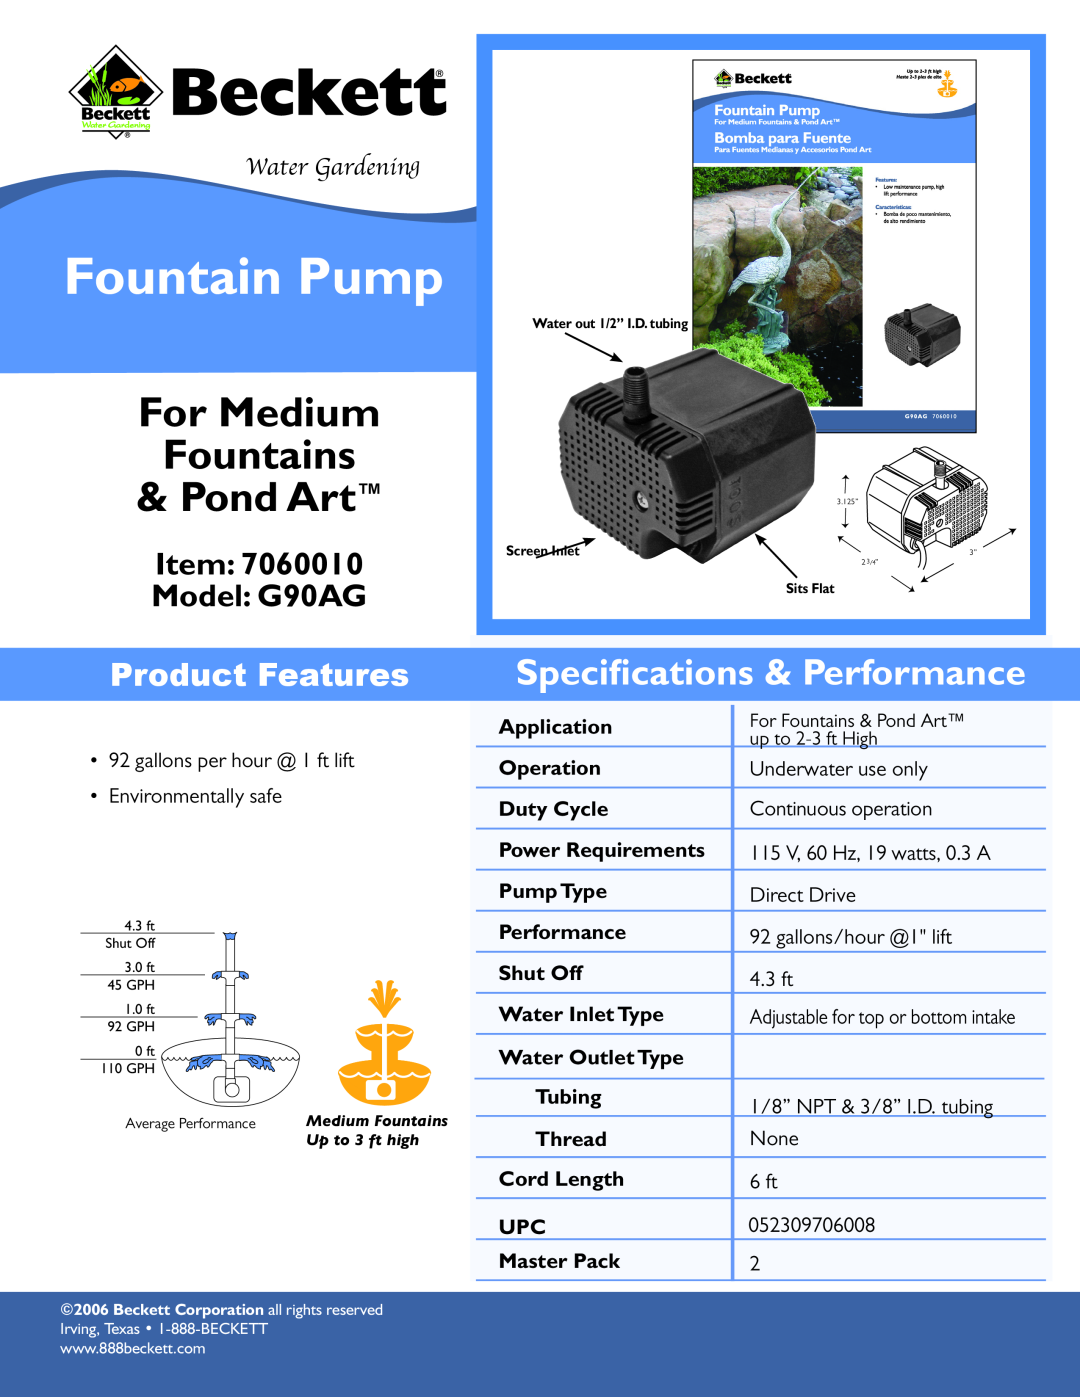 Beckett Water Gardening G90AG specifications Fountain Pump, For Medium Fountains Pond Art, Speciﬁcations & Performance 